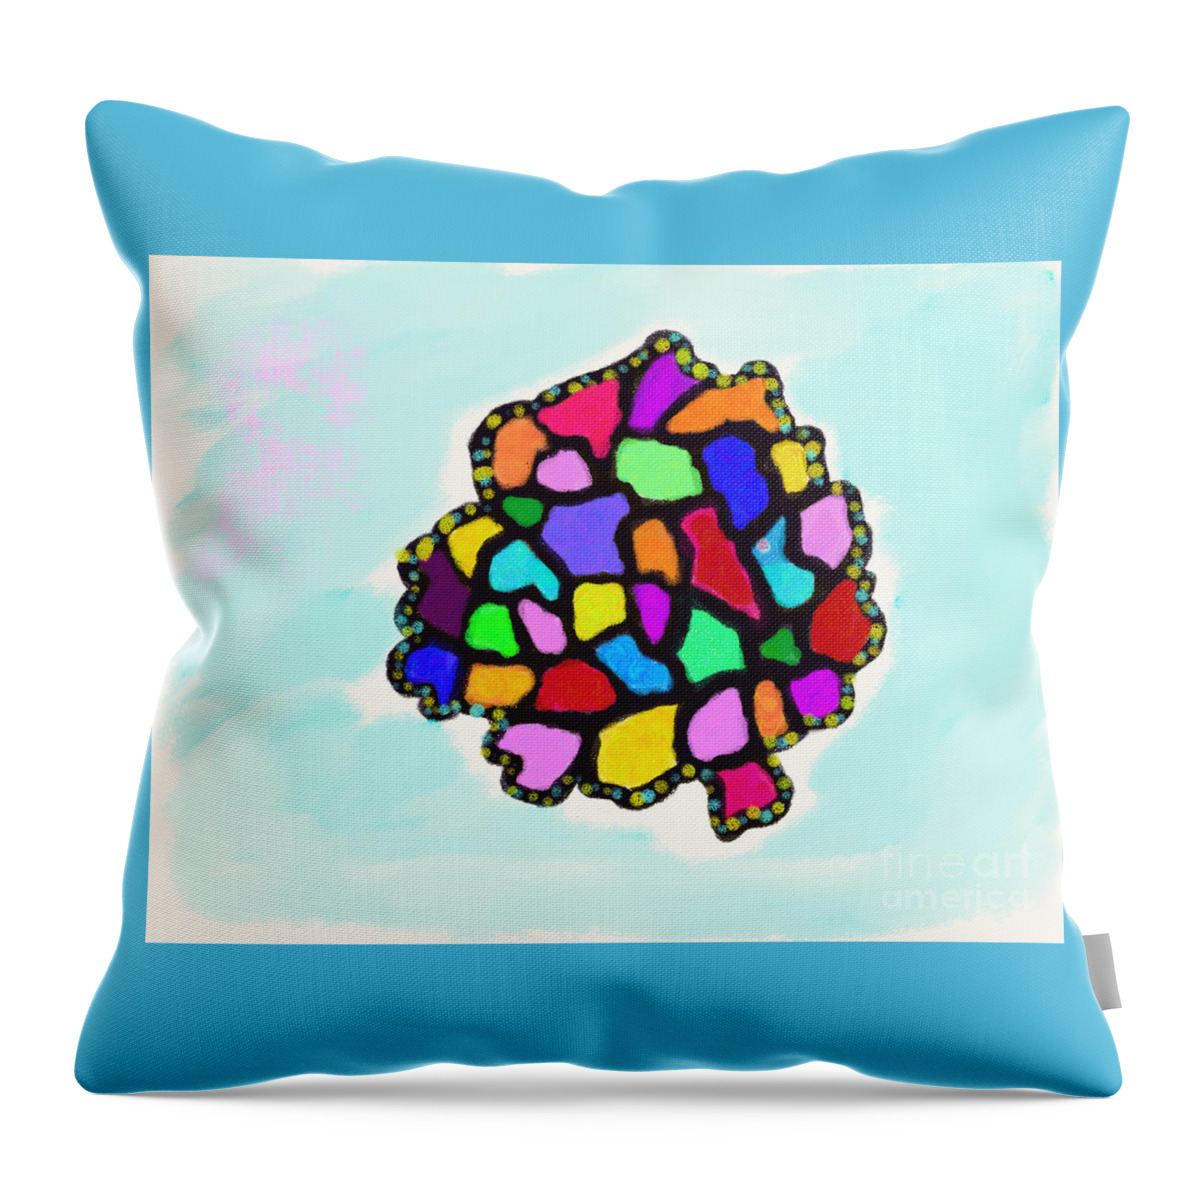 Primitive Impressionistic Expressionism Throw Pillow featuring the digital art Stained-glass Pomegranate by Zotshee Zotshee